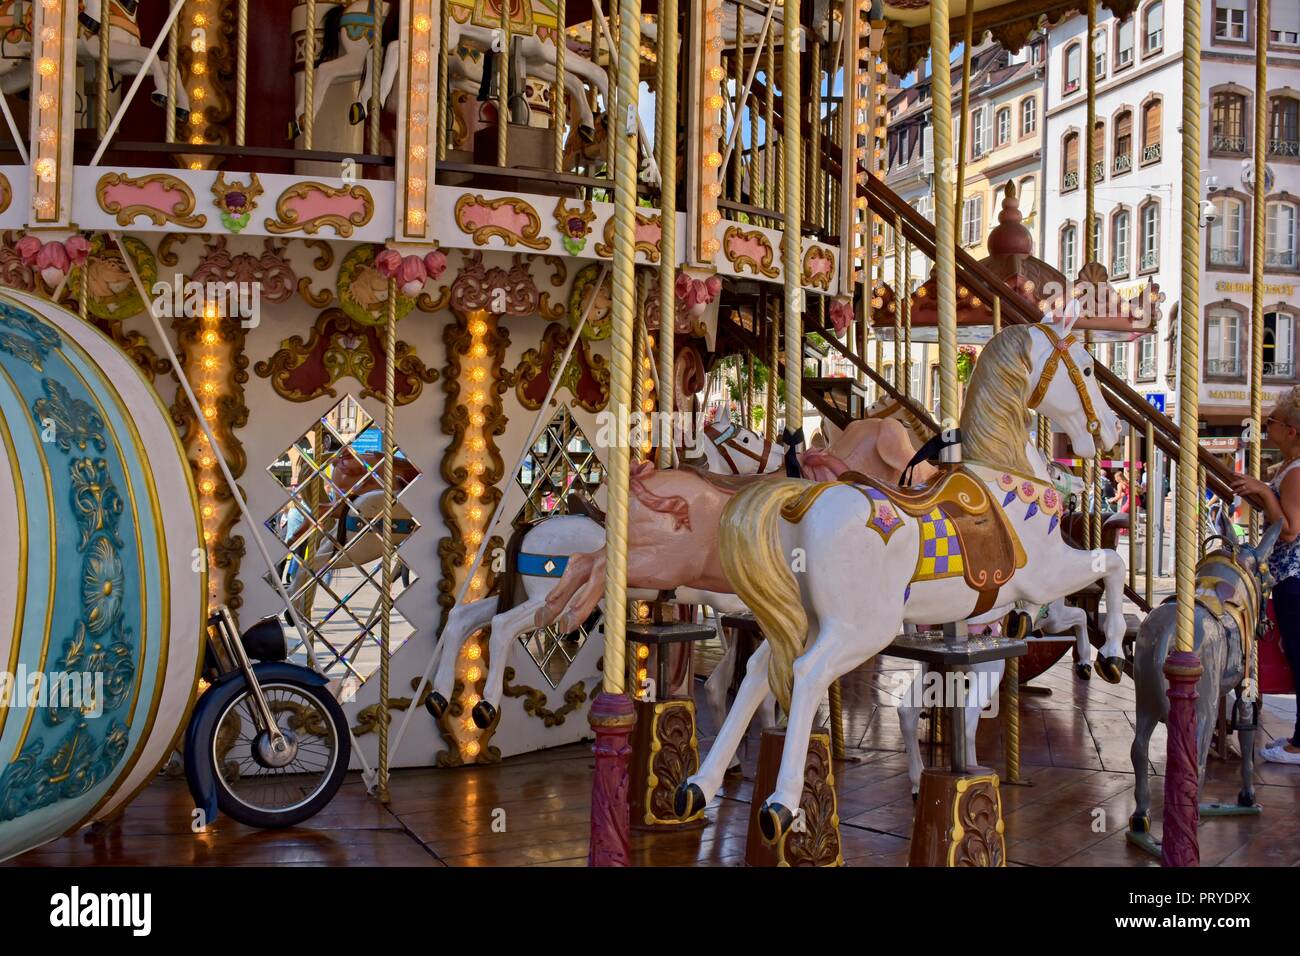 Old fashioned Merry go round at Place Gutenberg in Strasbourg, France Stock Photo